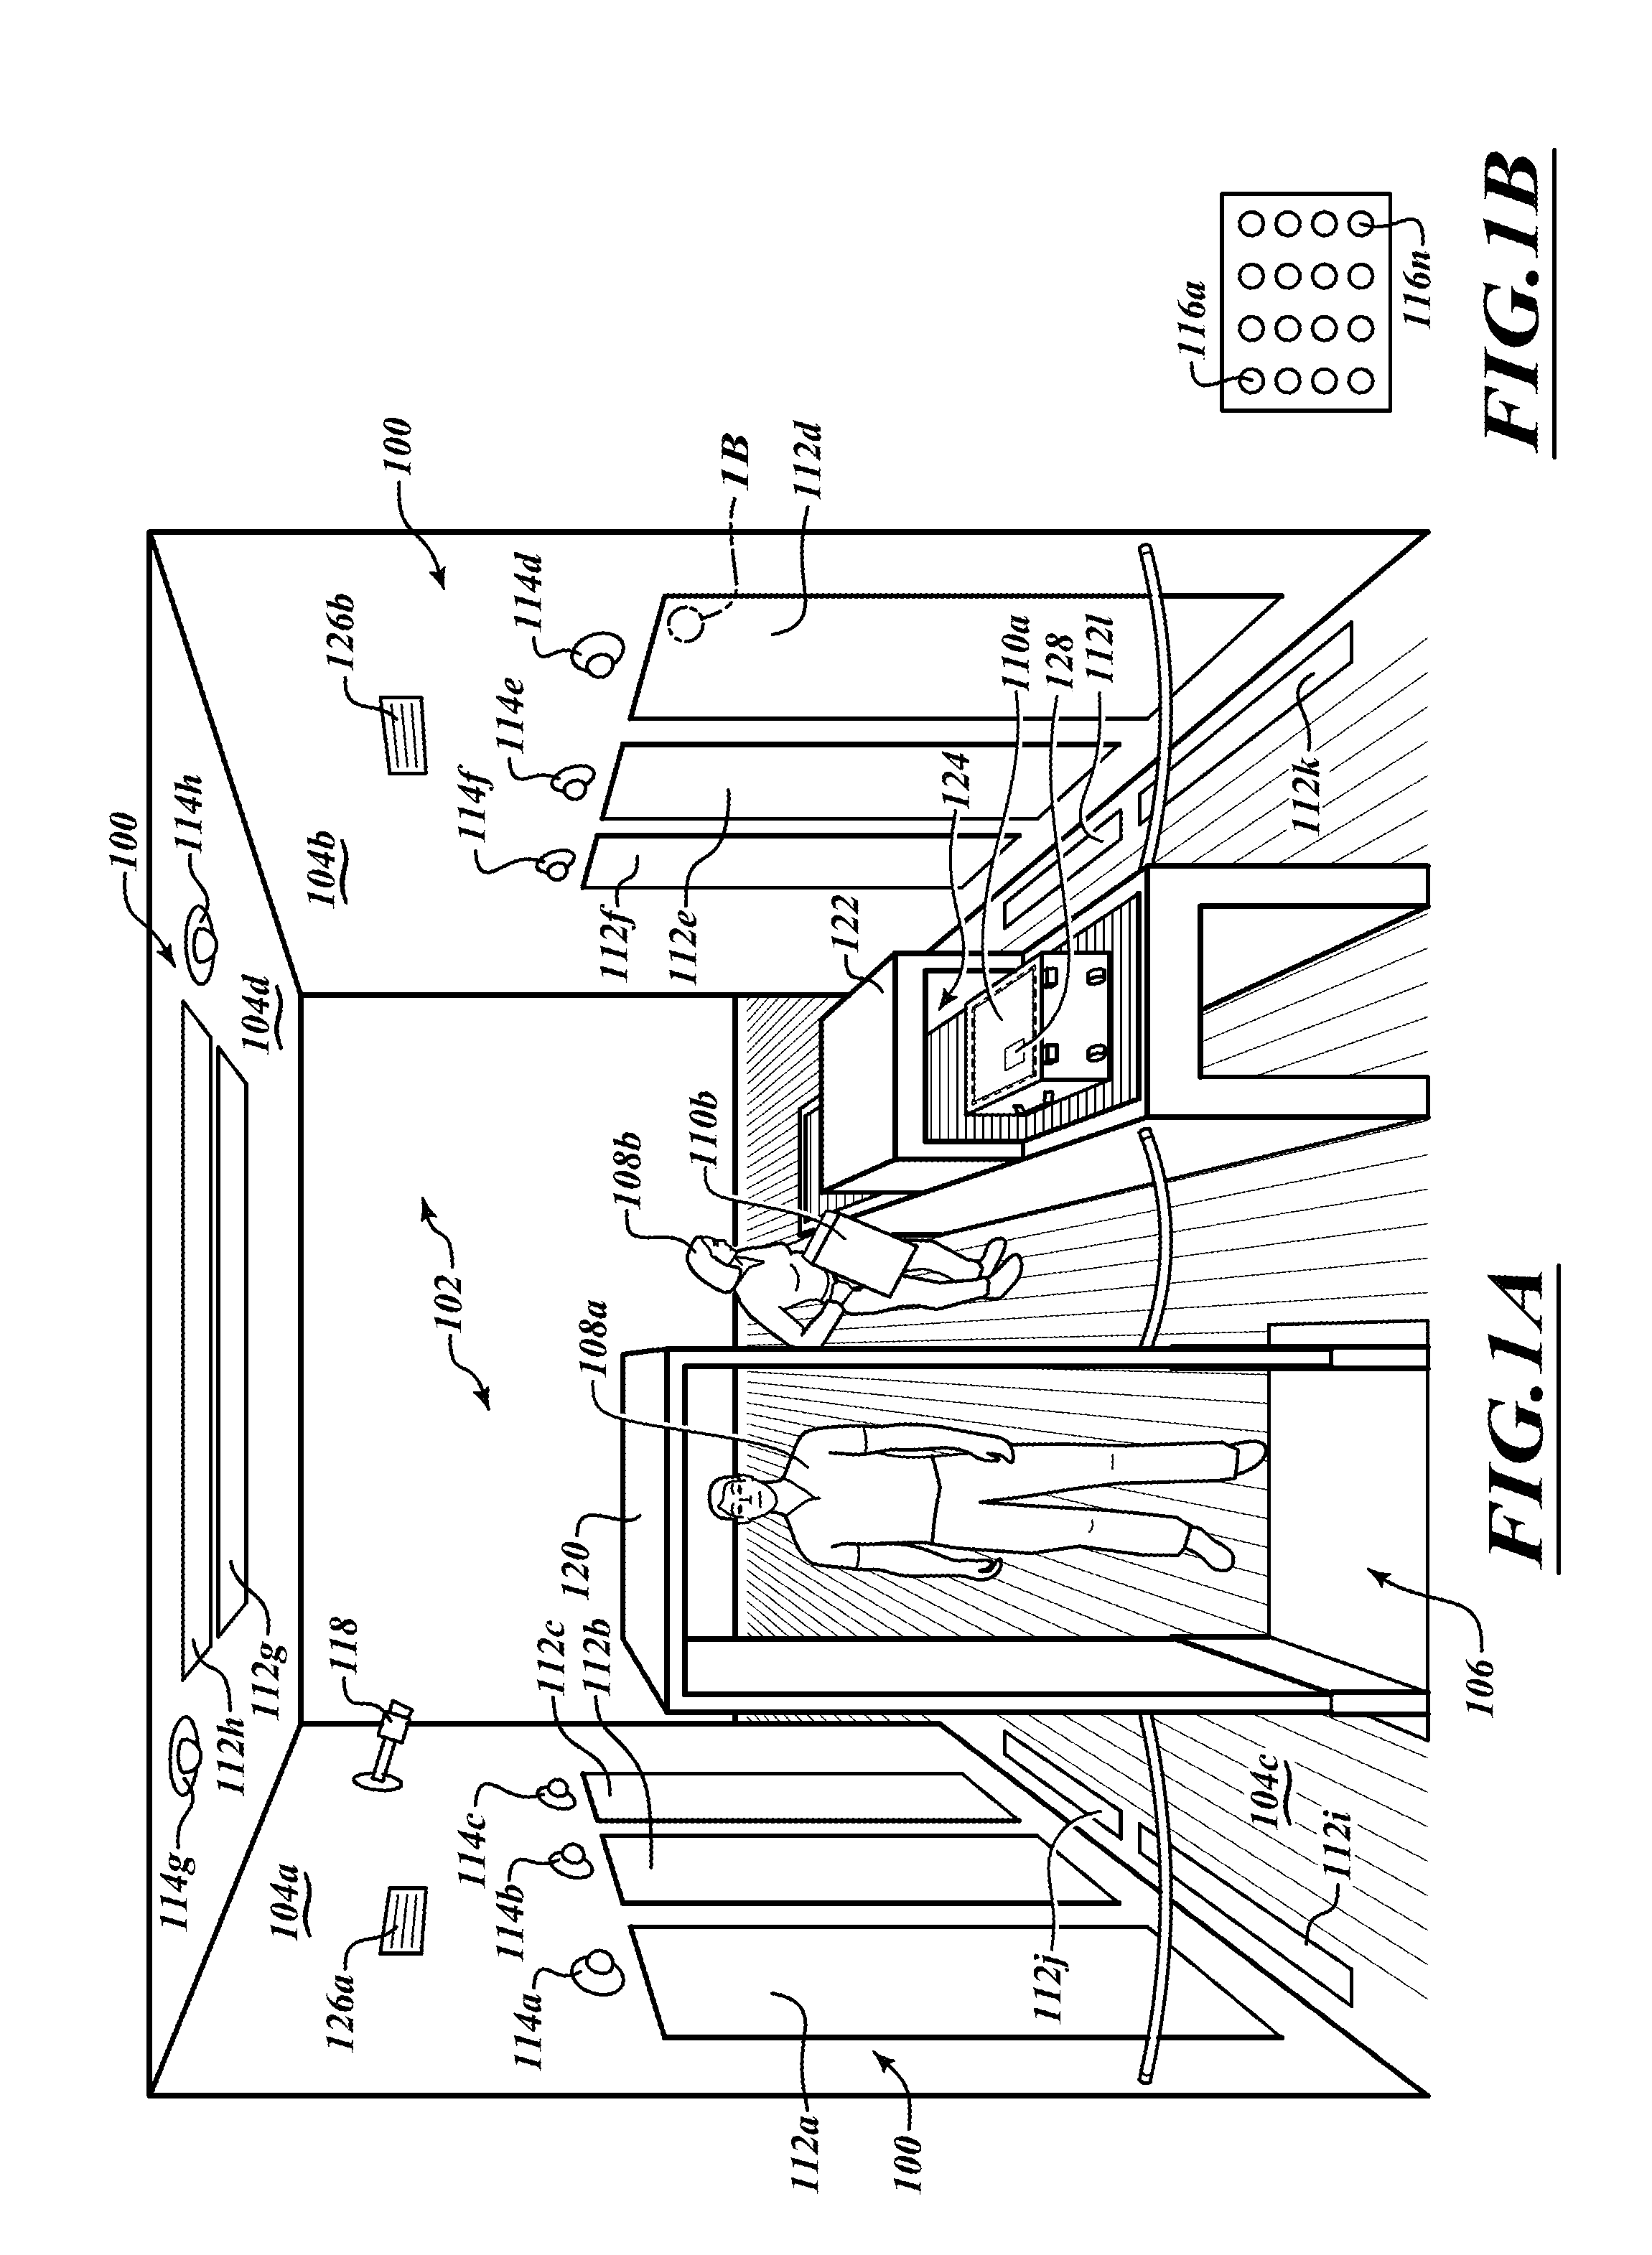 Area surveillance systems and methods